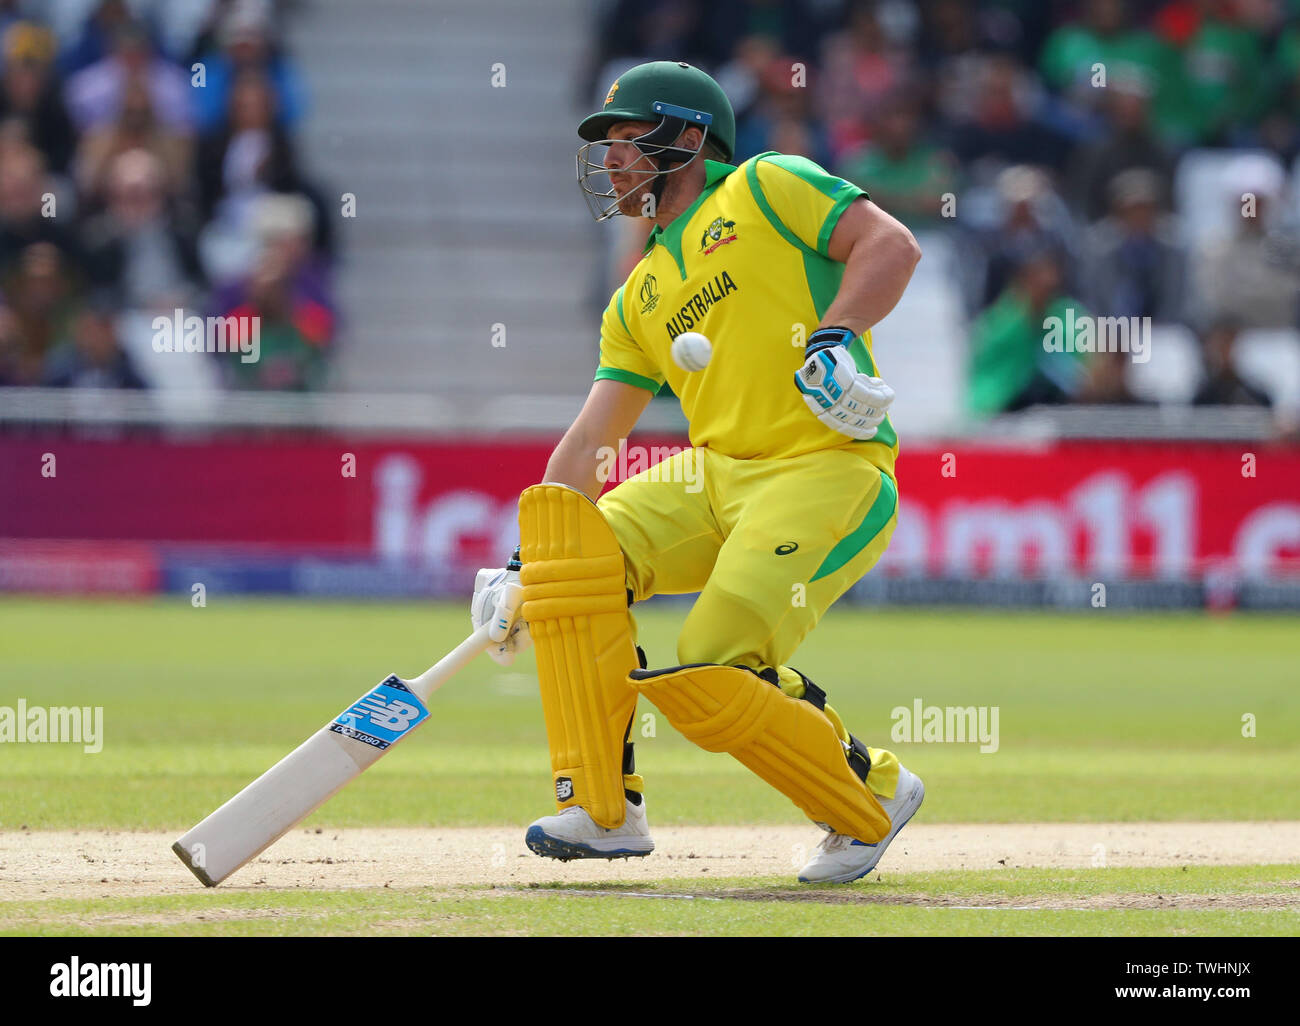 NOTTINGHAM, ENGLAND. 20 JUNE 2019: Aaron Finch of Australia avoids getting hit by the ball as he runs a single during the Australia v Bangladesh, ICC Cricket World Cup match, at Trent Bridge, Nottingham, England. Credit: Cal Sport Media/Alamy Live News Stock Photo